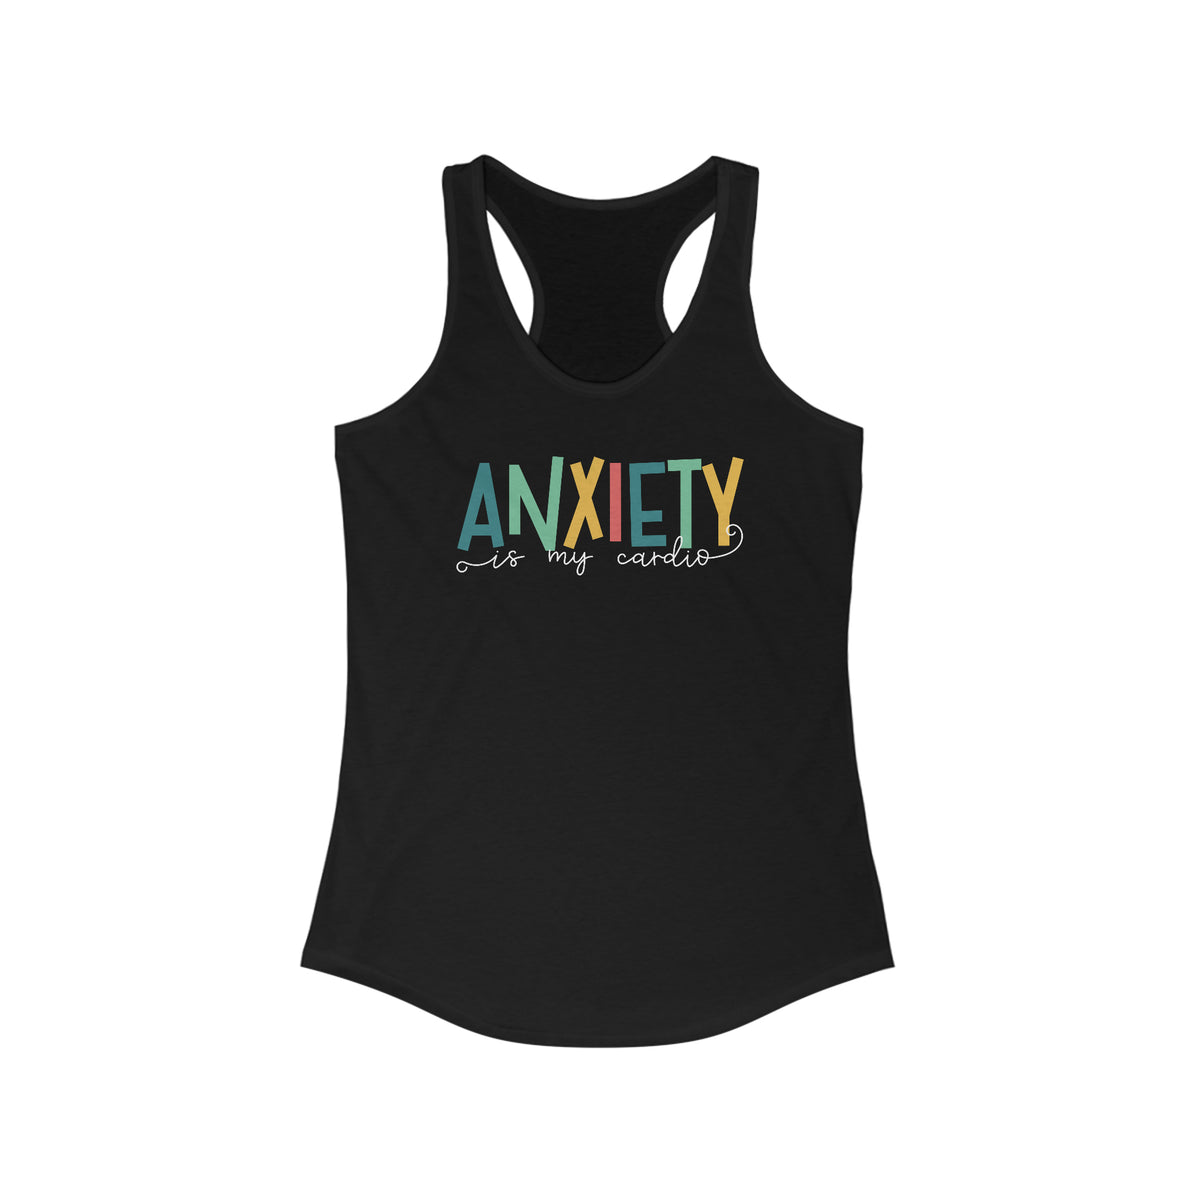 Anxiety Is My Cardio Anxiety Shirt | Funny Mental Health Shirt | Counselor Shirt | Gift For Her | Women's Slim-fit Racerback Tank Top